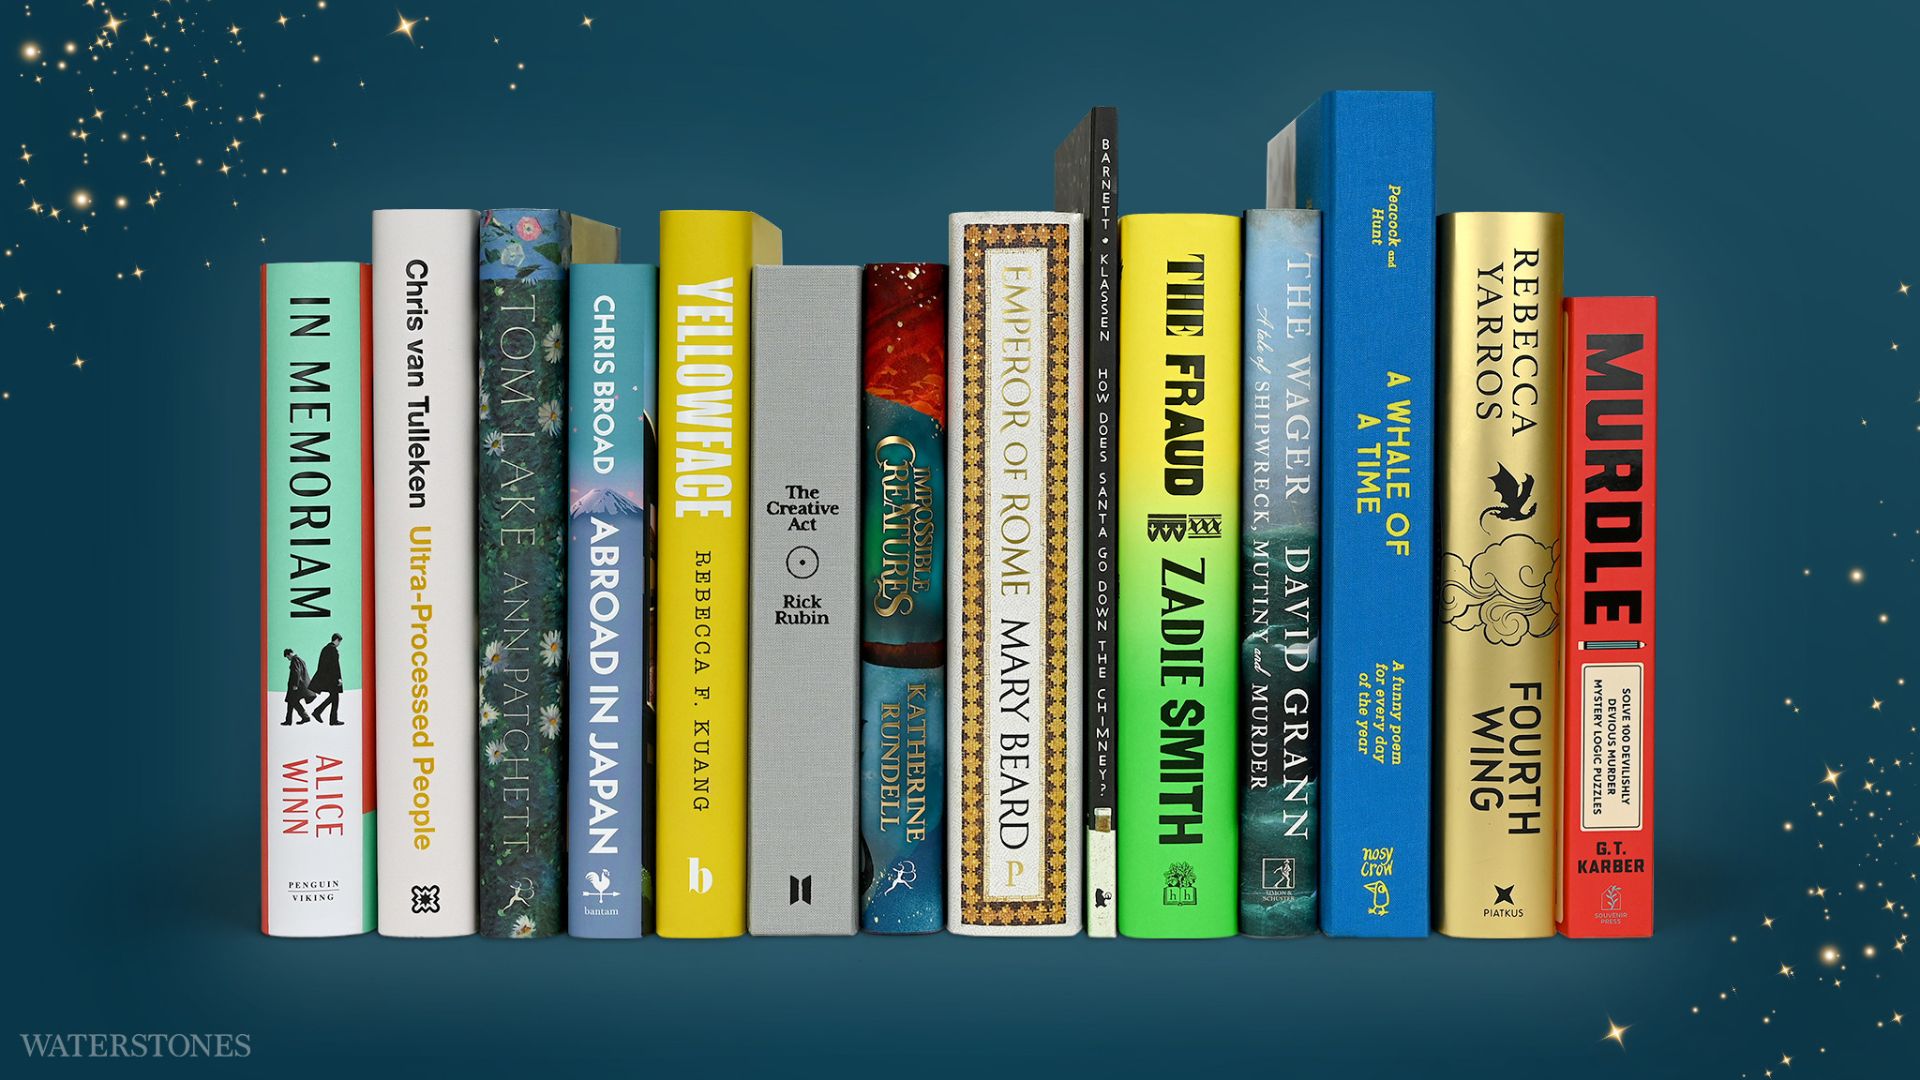 Waterstones Book of the Year shortlist